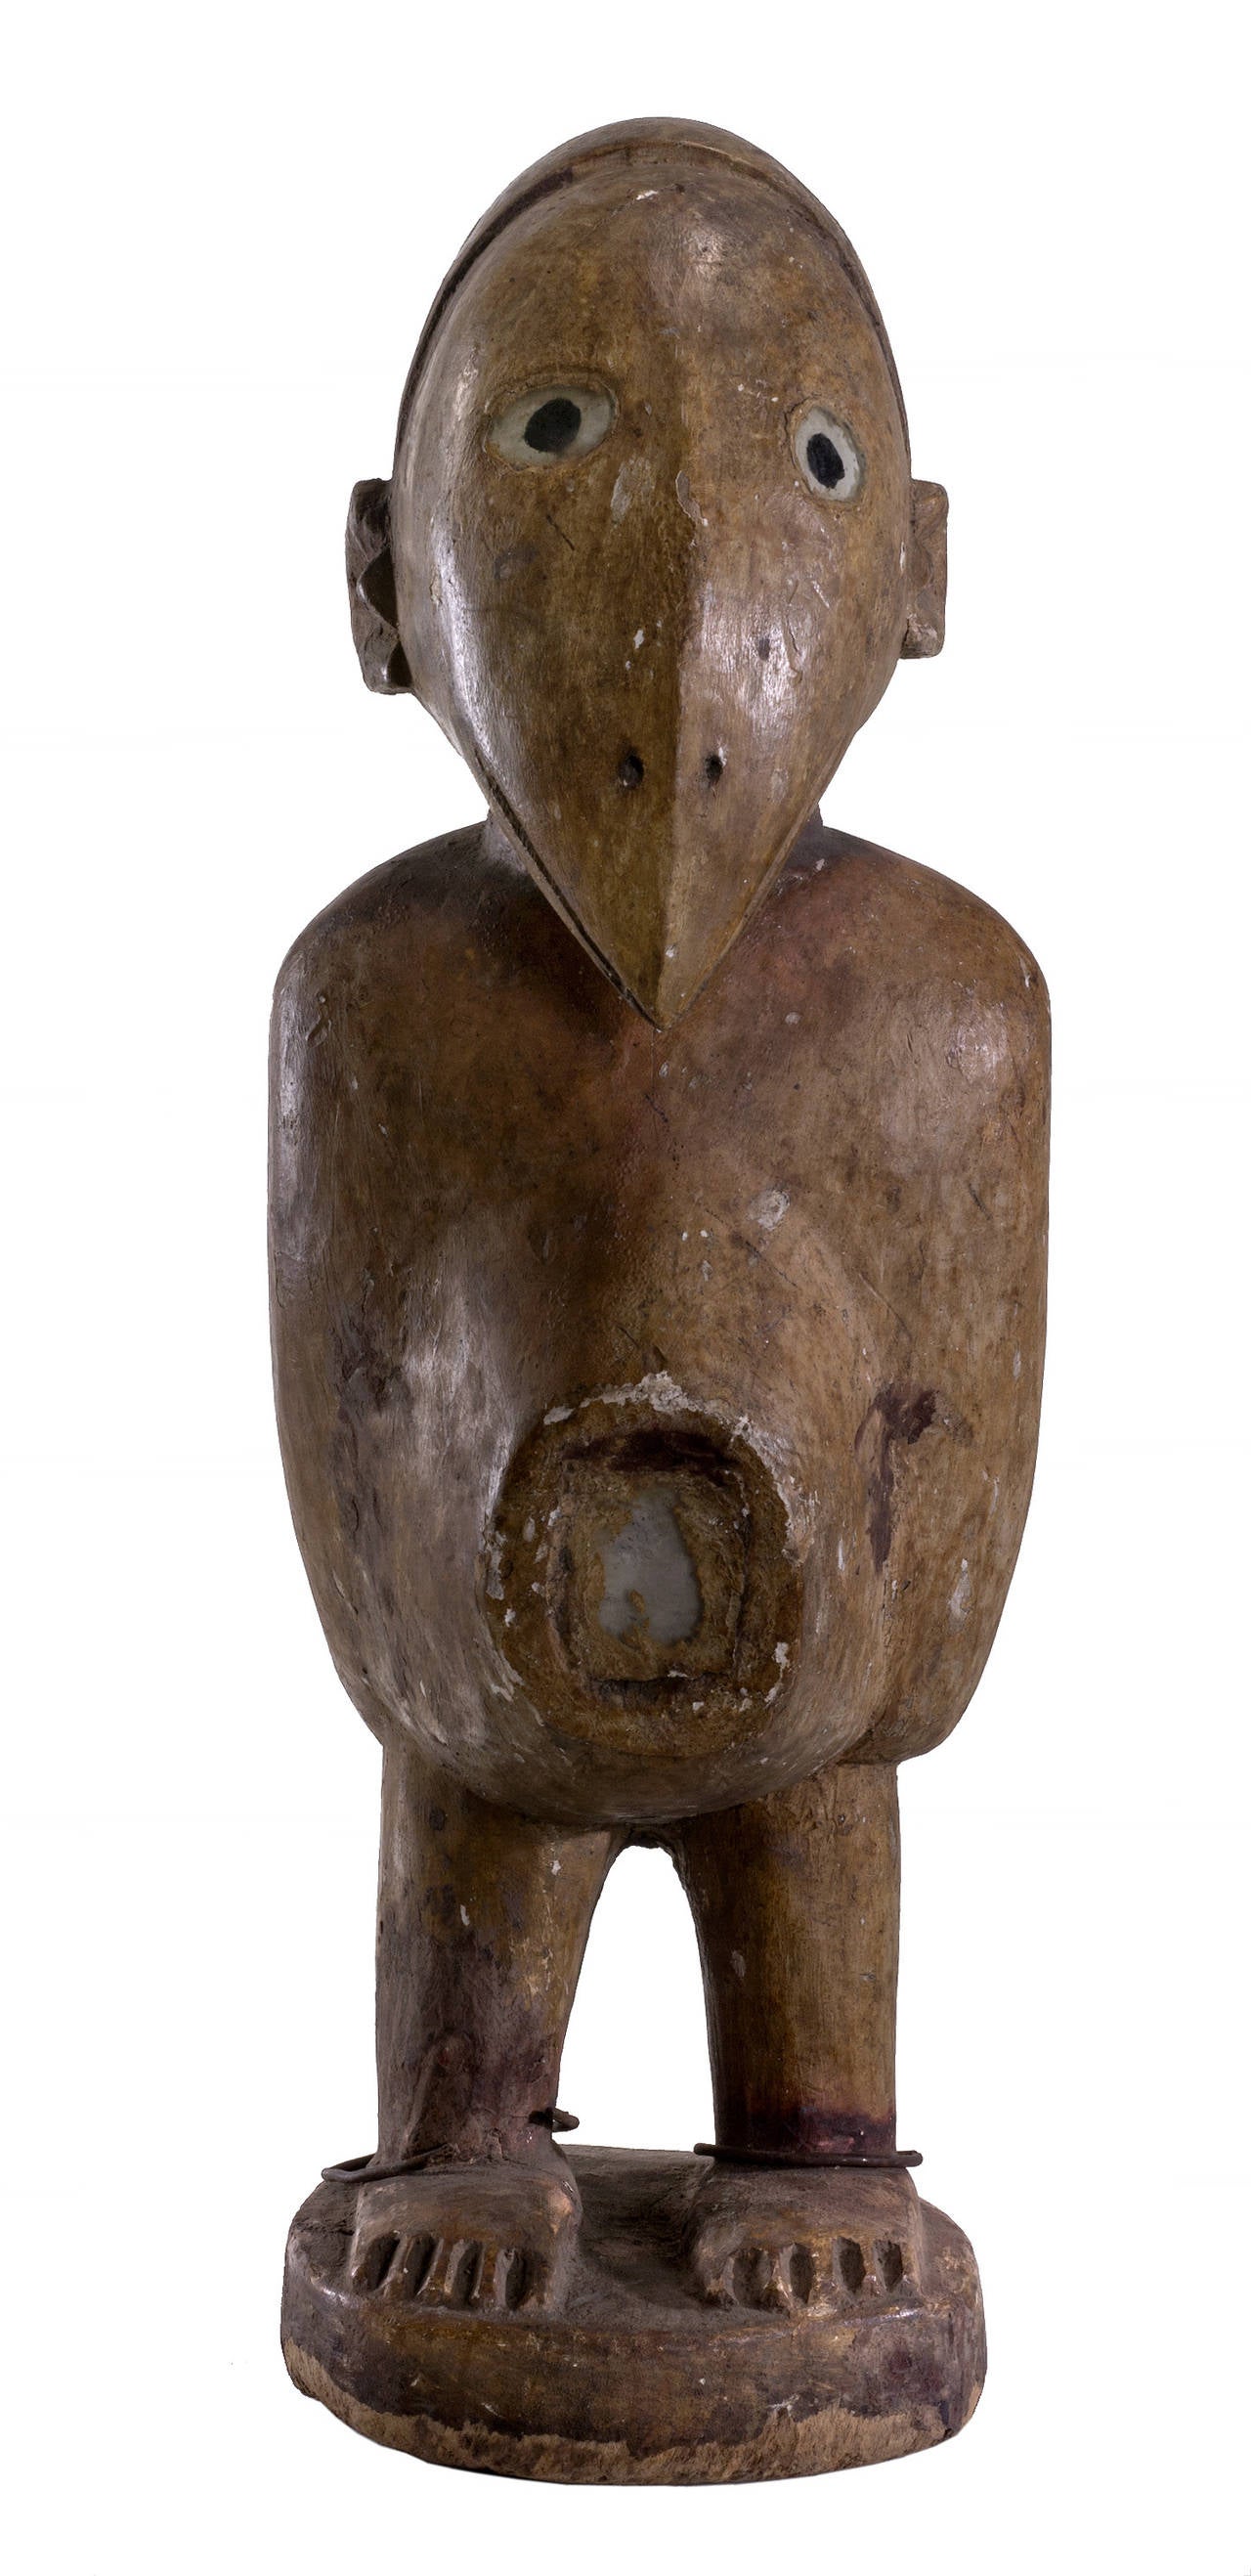 Power figure 20th century from the Congo. Made from wood, and painted yellow on top.Its one of few Congo pieces with prolonged face of an owl and human combined which indicate awareness and protection. There is a mirror in the belly with protective